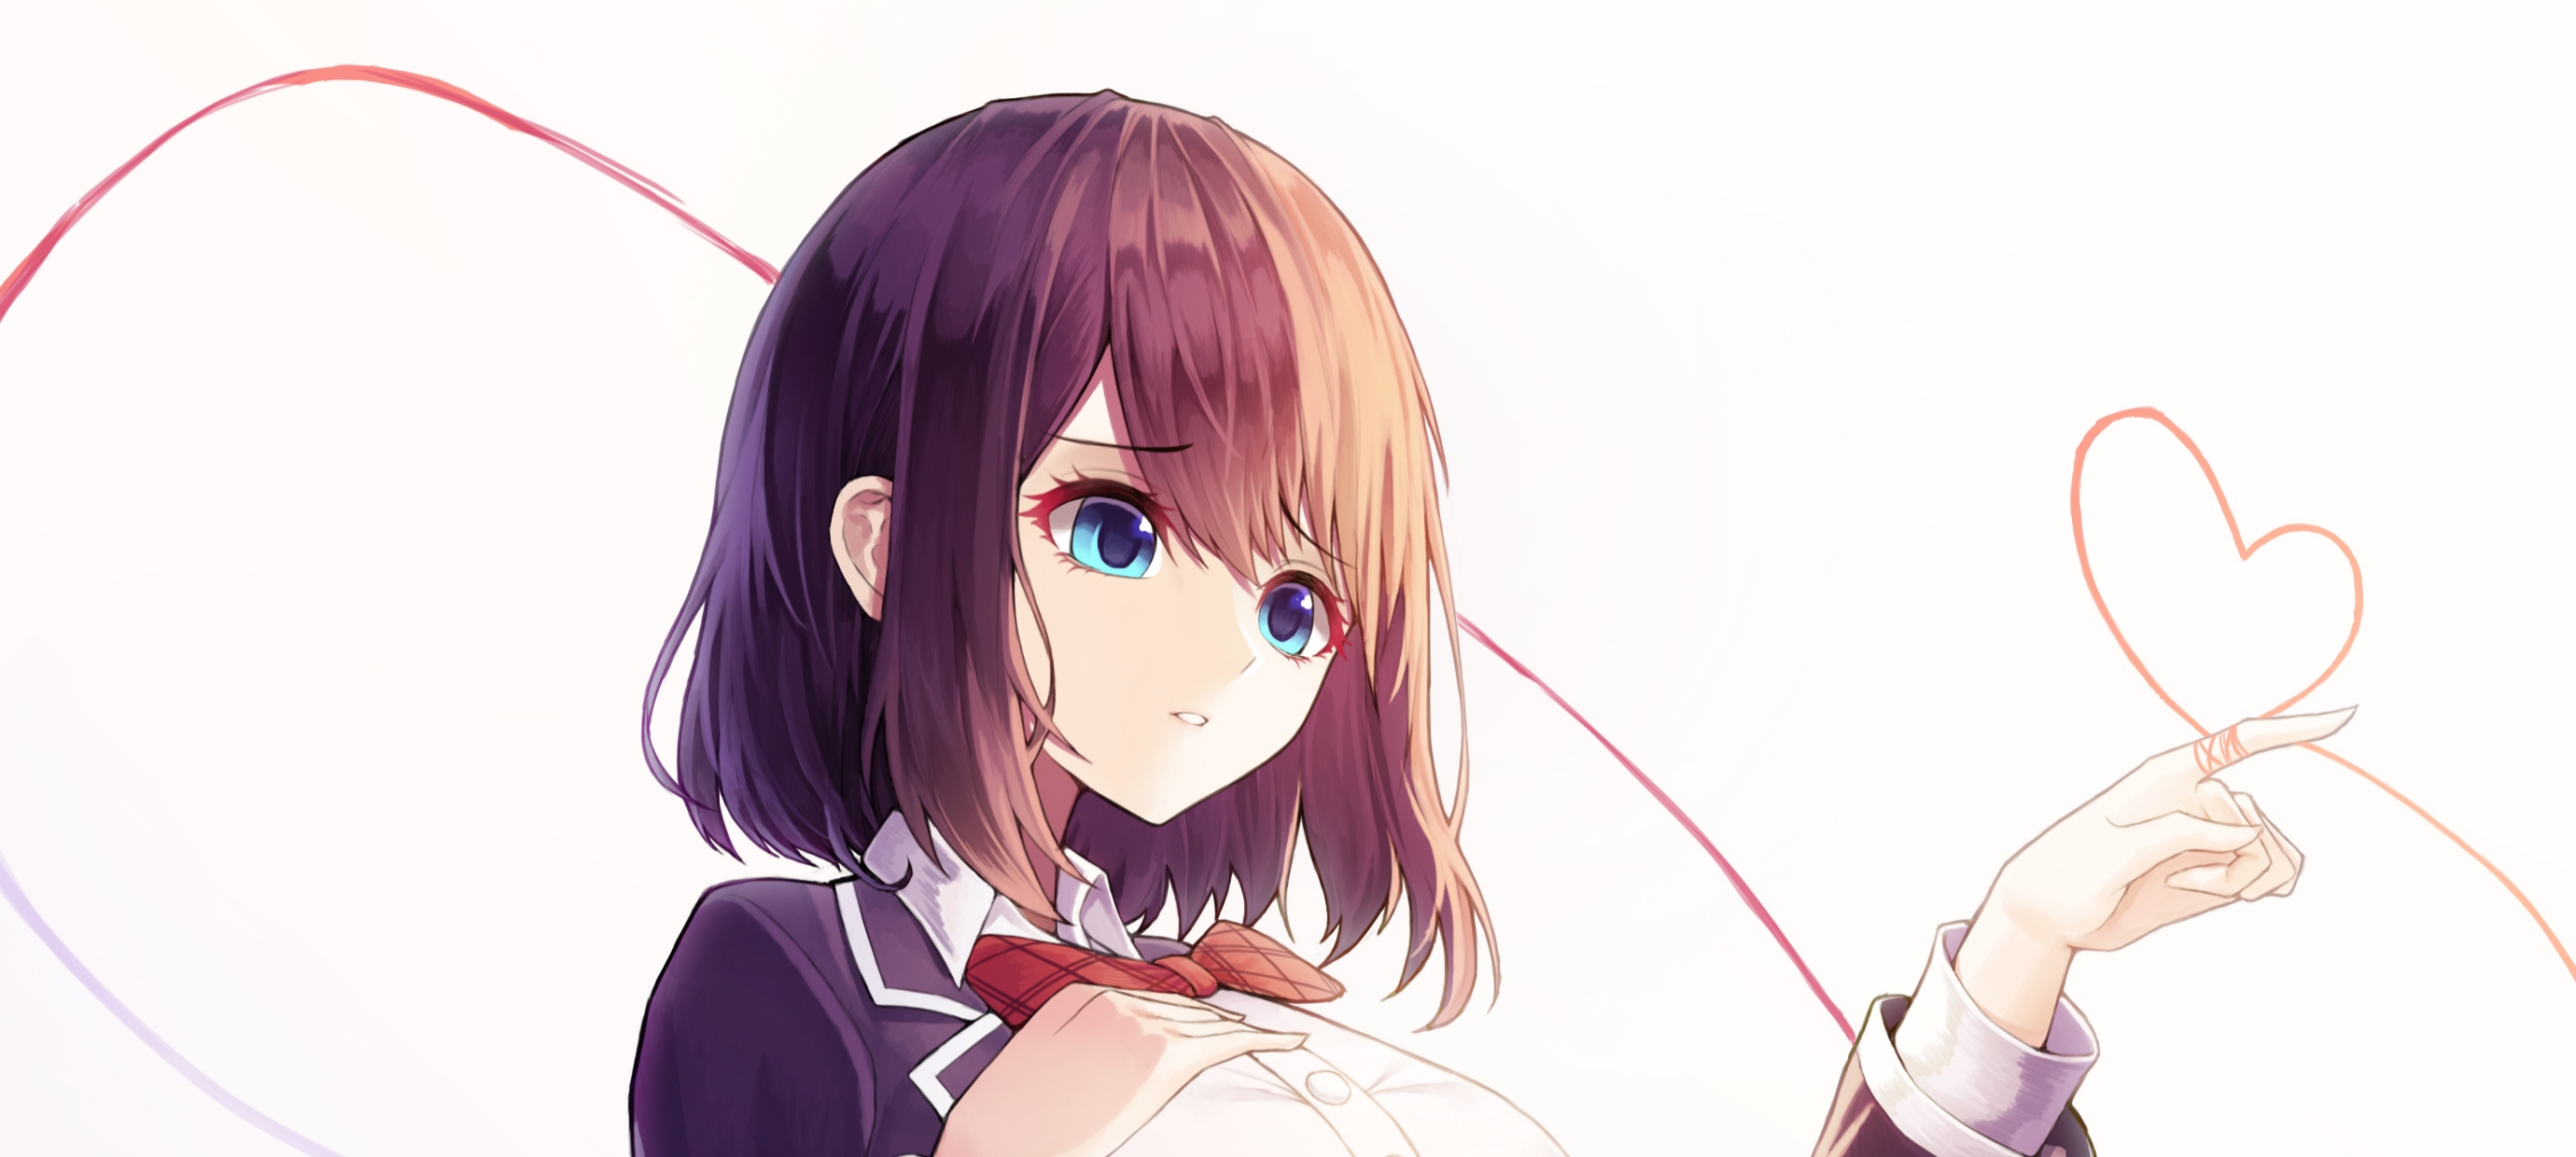 Anime Love and Lies HD Wallpaper | Background Image